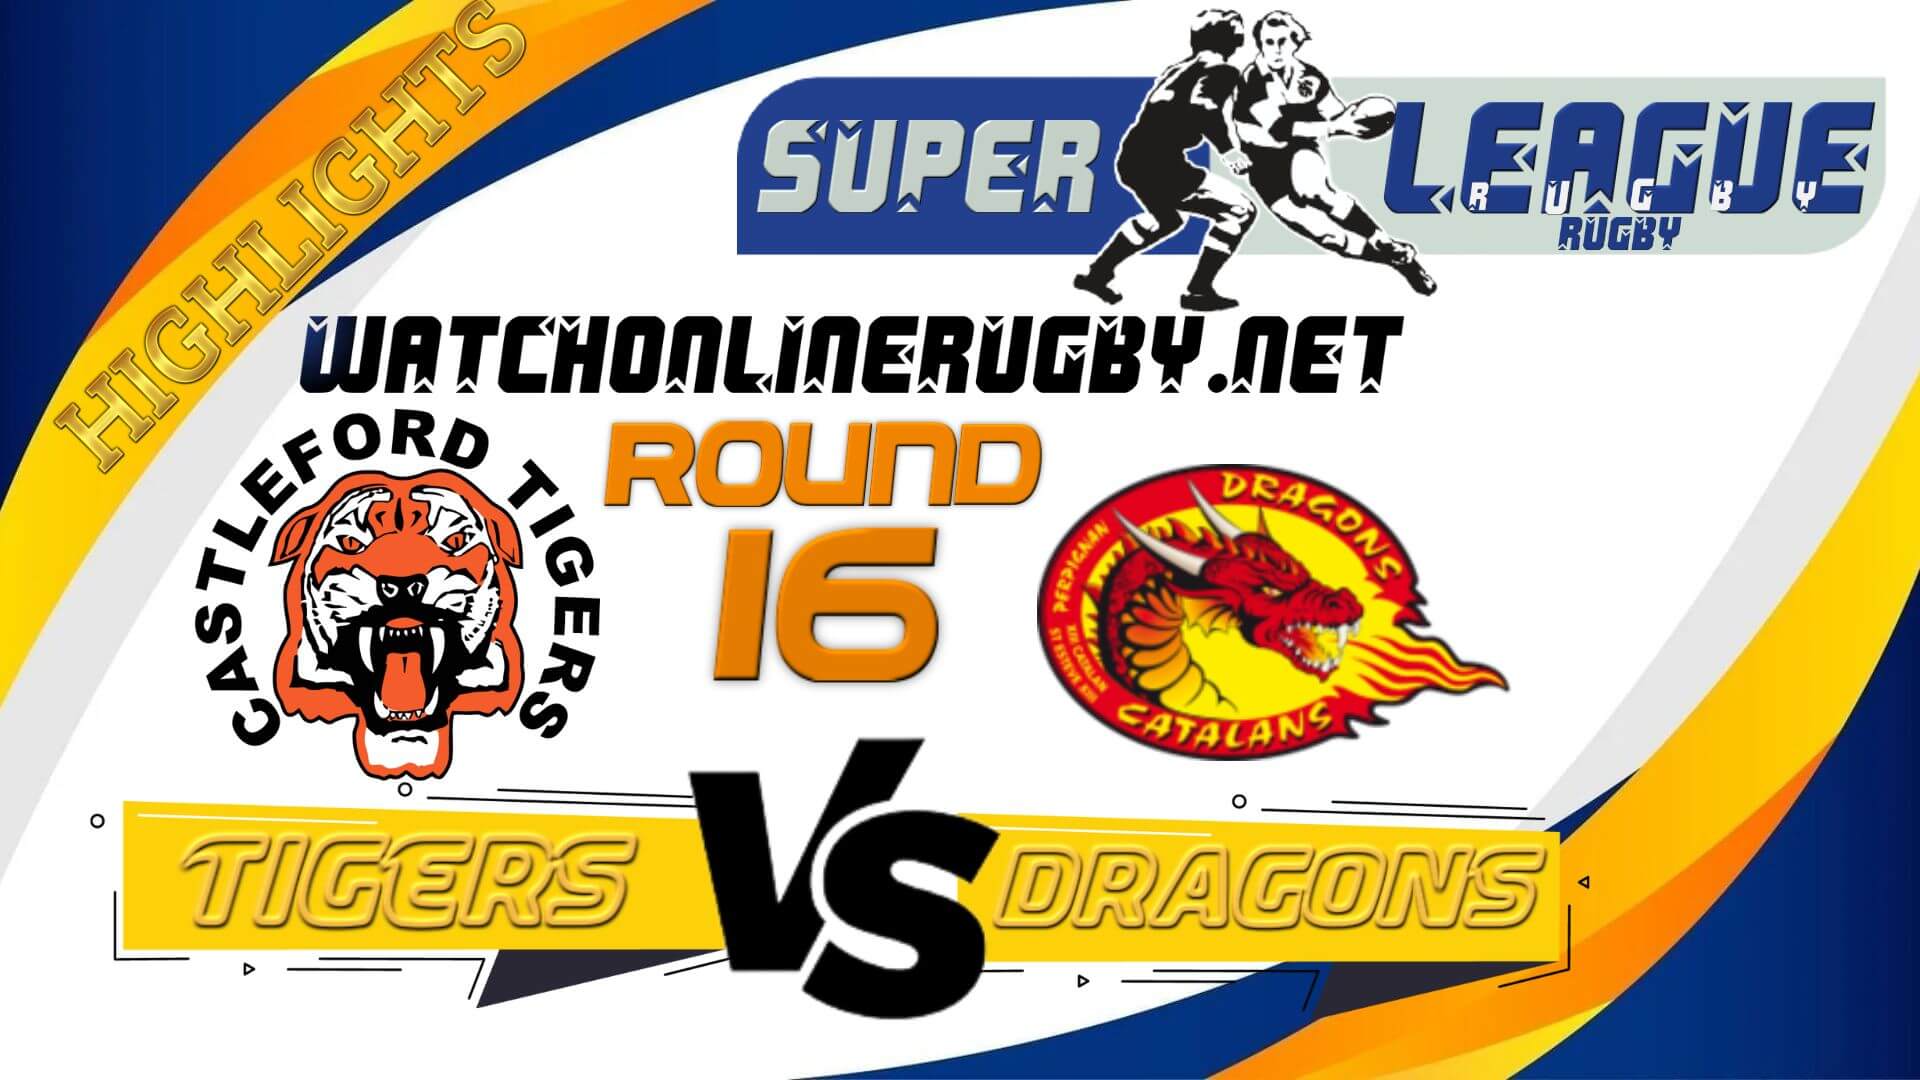 Castleford Tigers Vs Catalan Dragons Super League Rugby 2022 RD 16